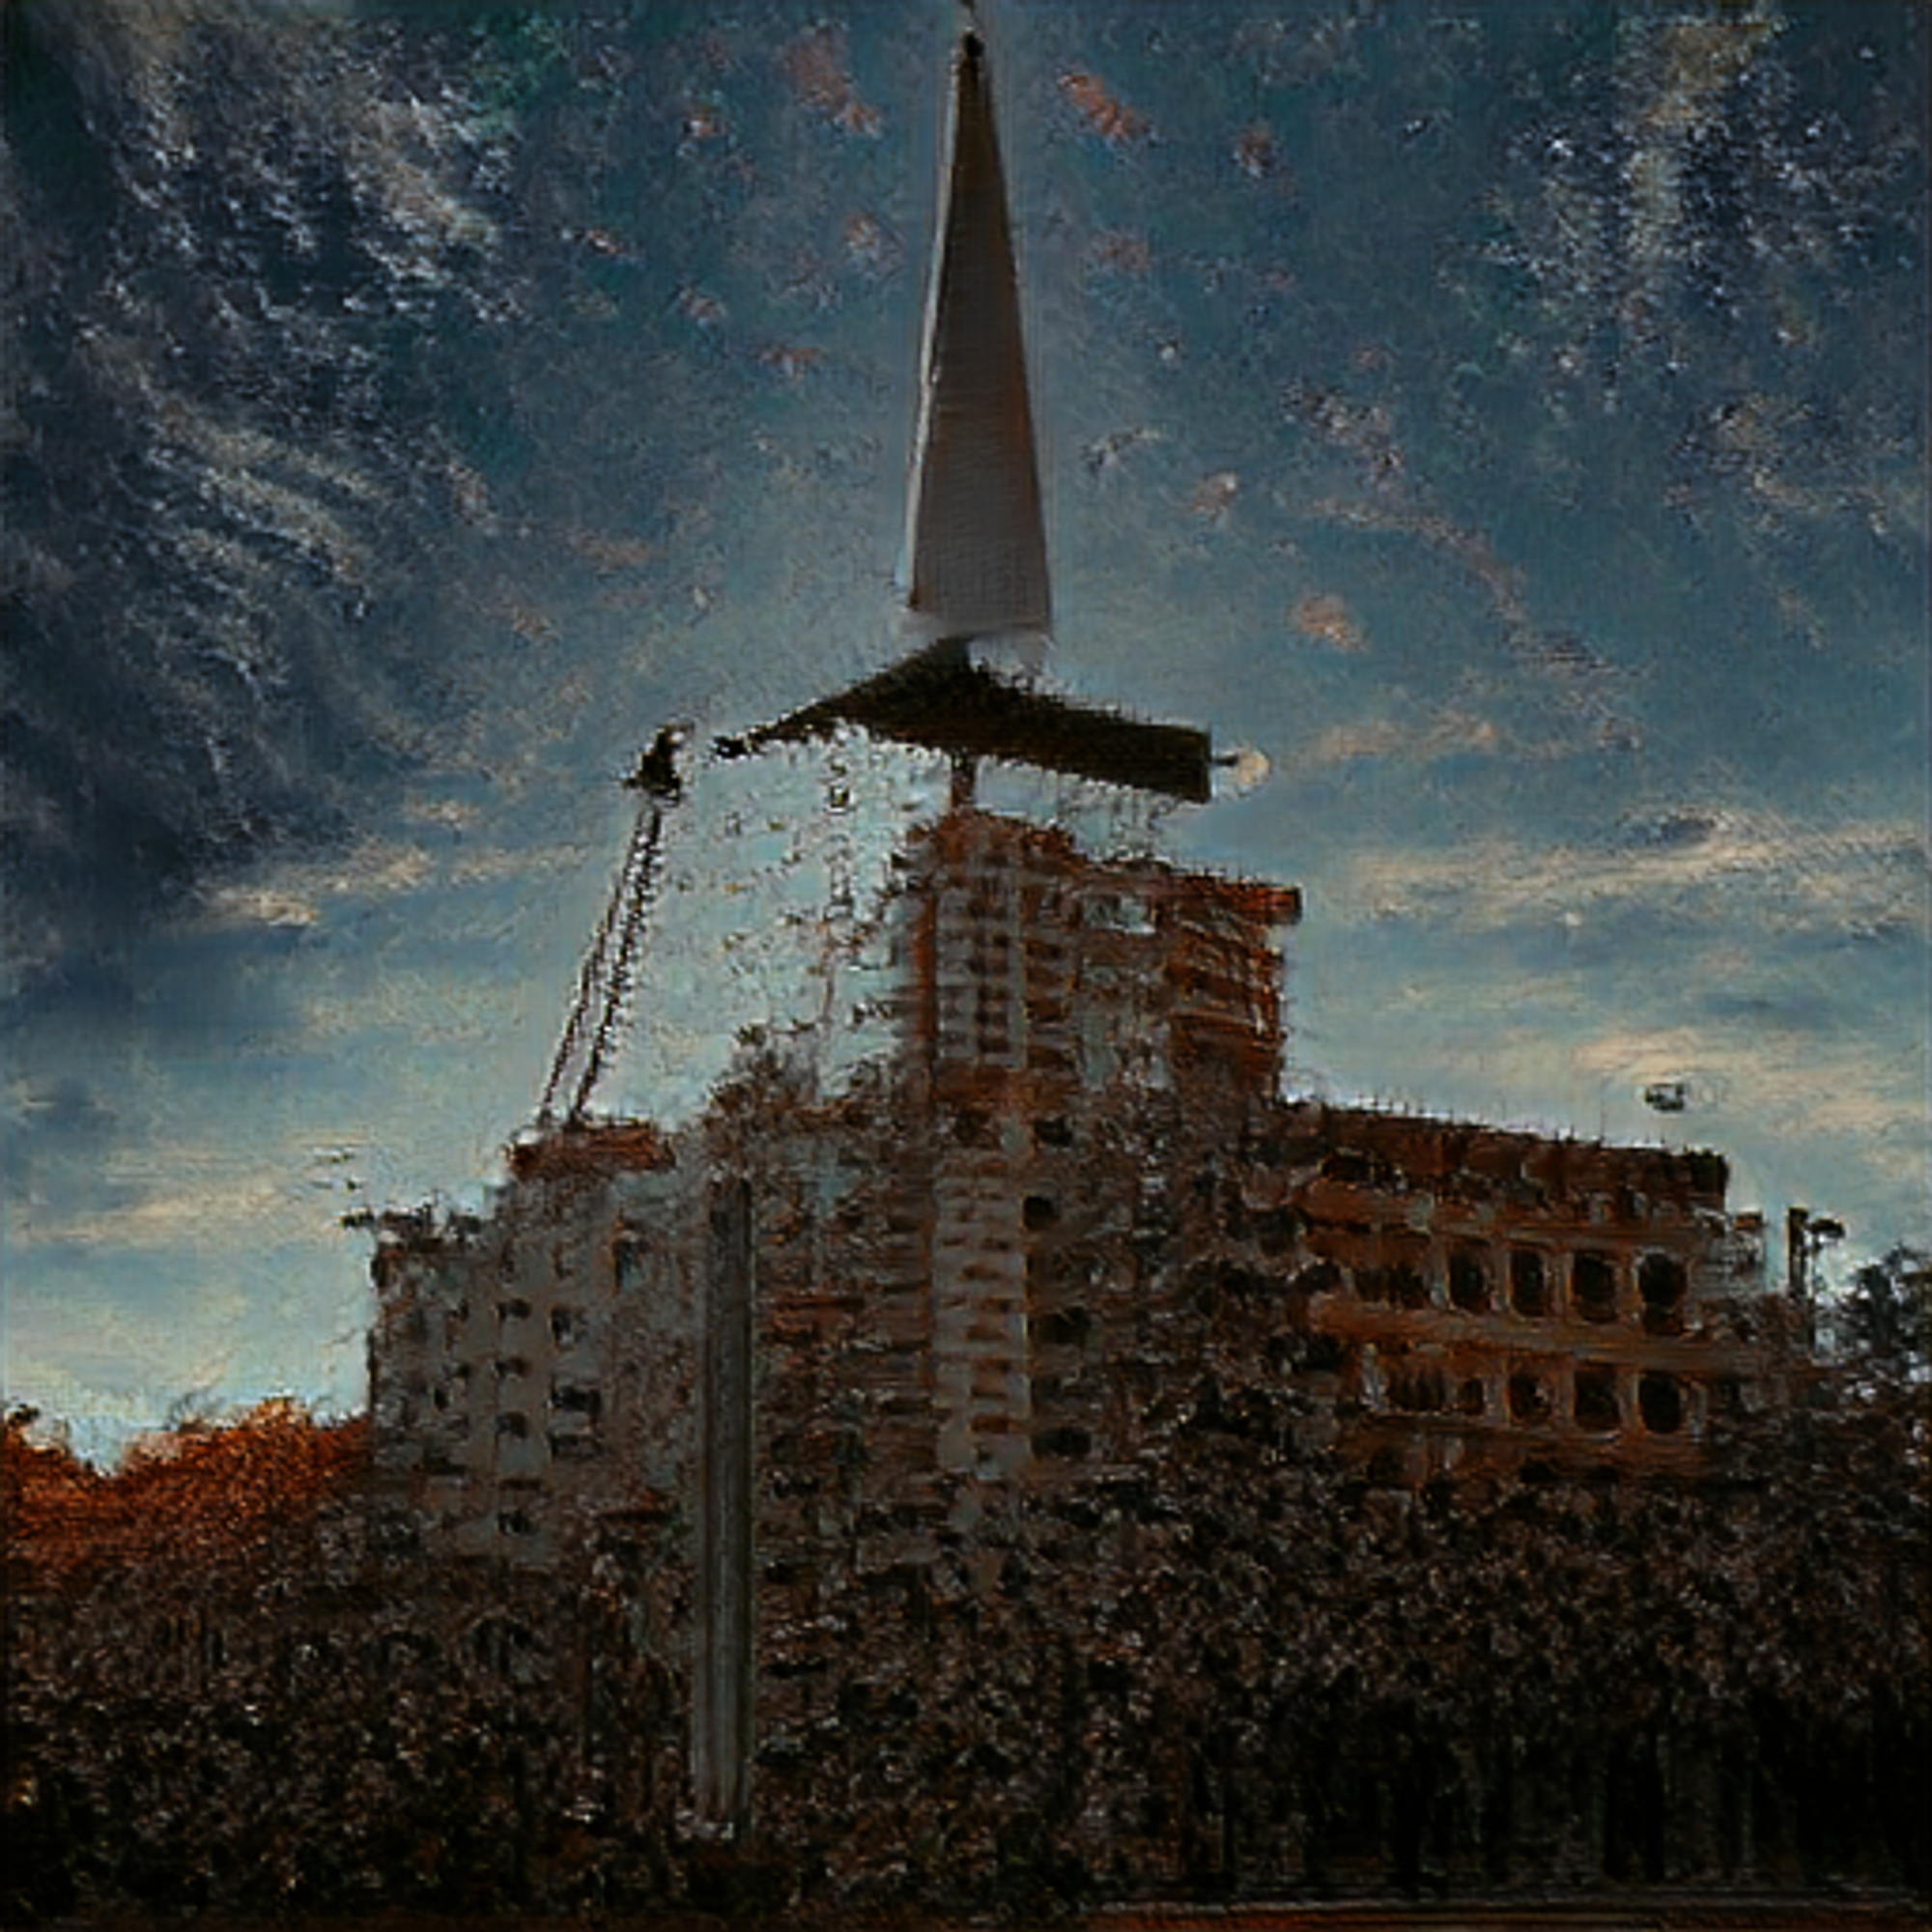 CLIP gives high score to this image and the phrase: "At the end of everything, crumbling buildings and a weapon to pierce the sky"